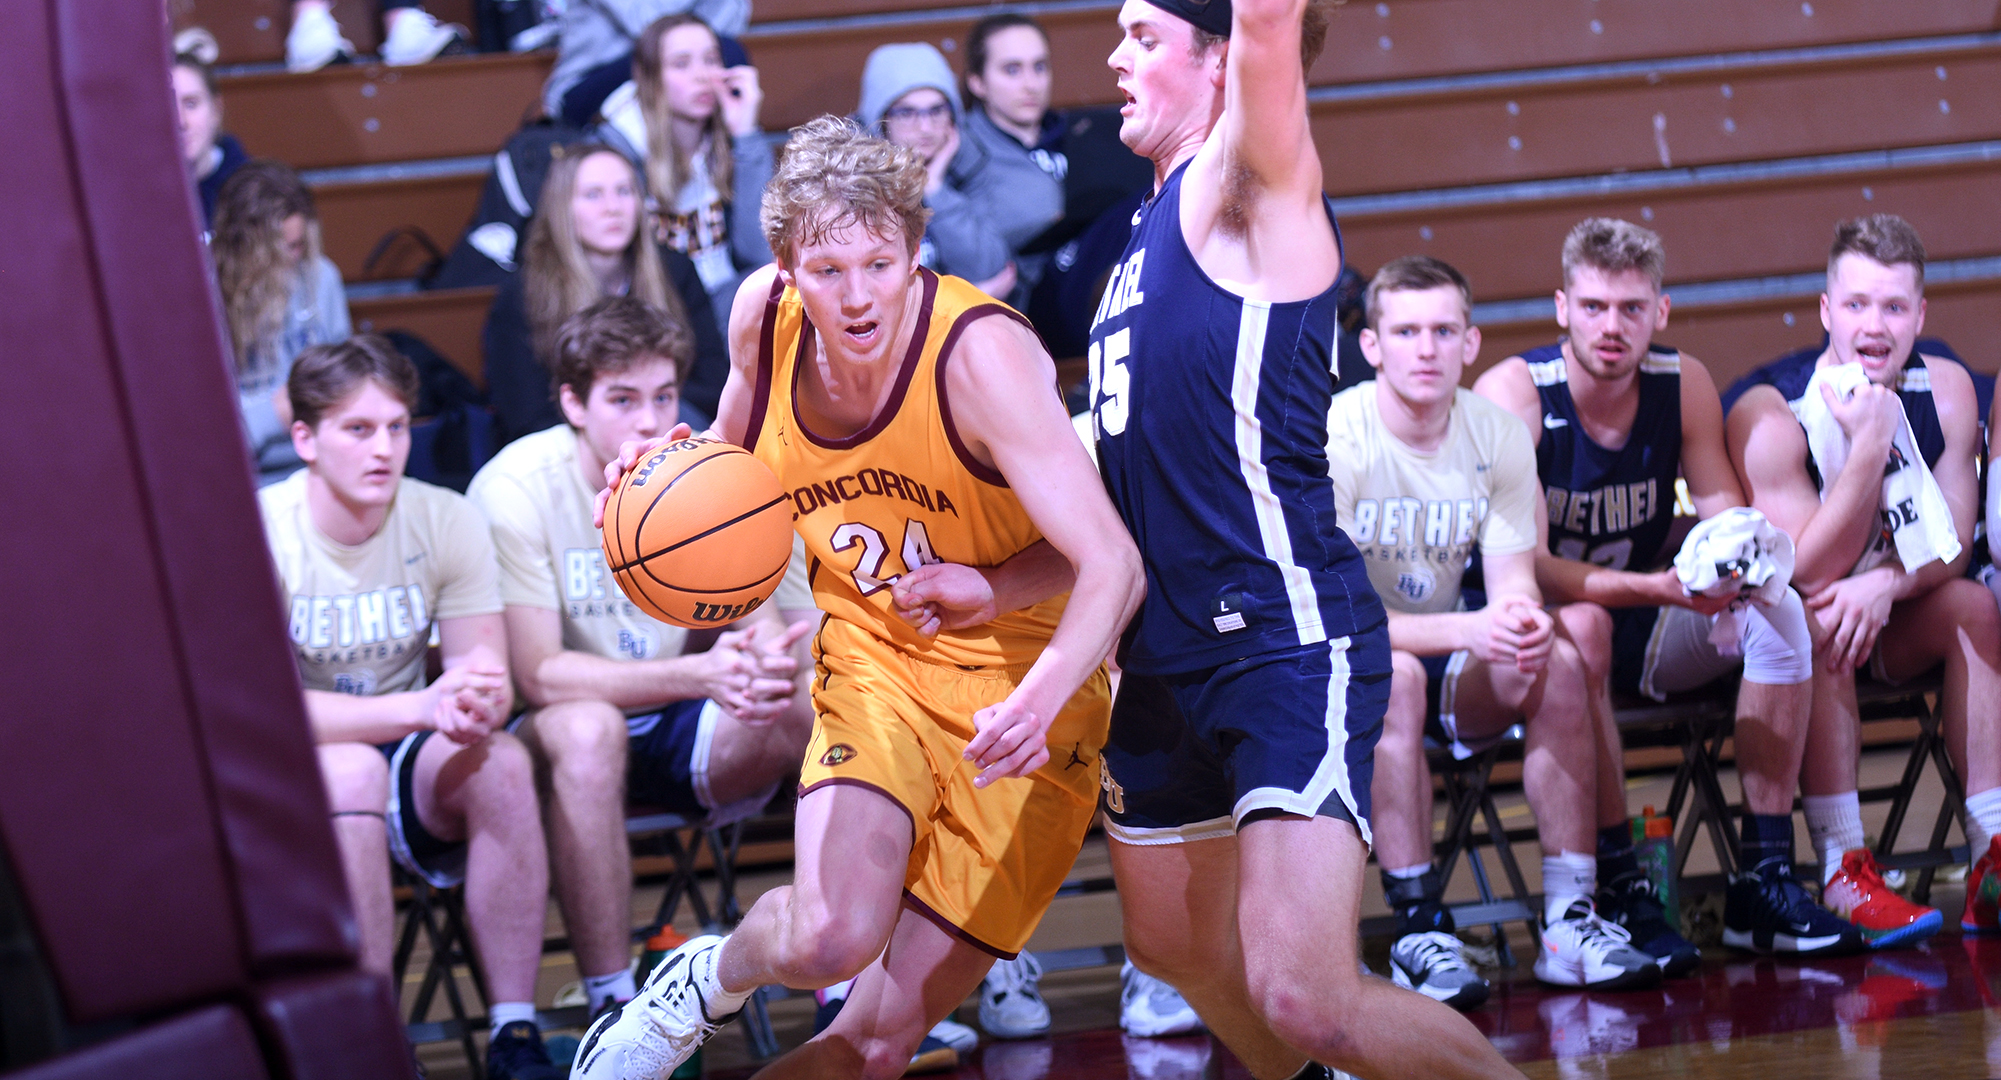 Dylan Inniger went 9-for-19 from the floor and 4-for-8 from distance to finish with a game-high 24 points in the Cobbers' playoff game at Bethel.